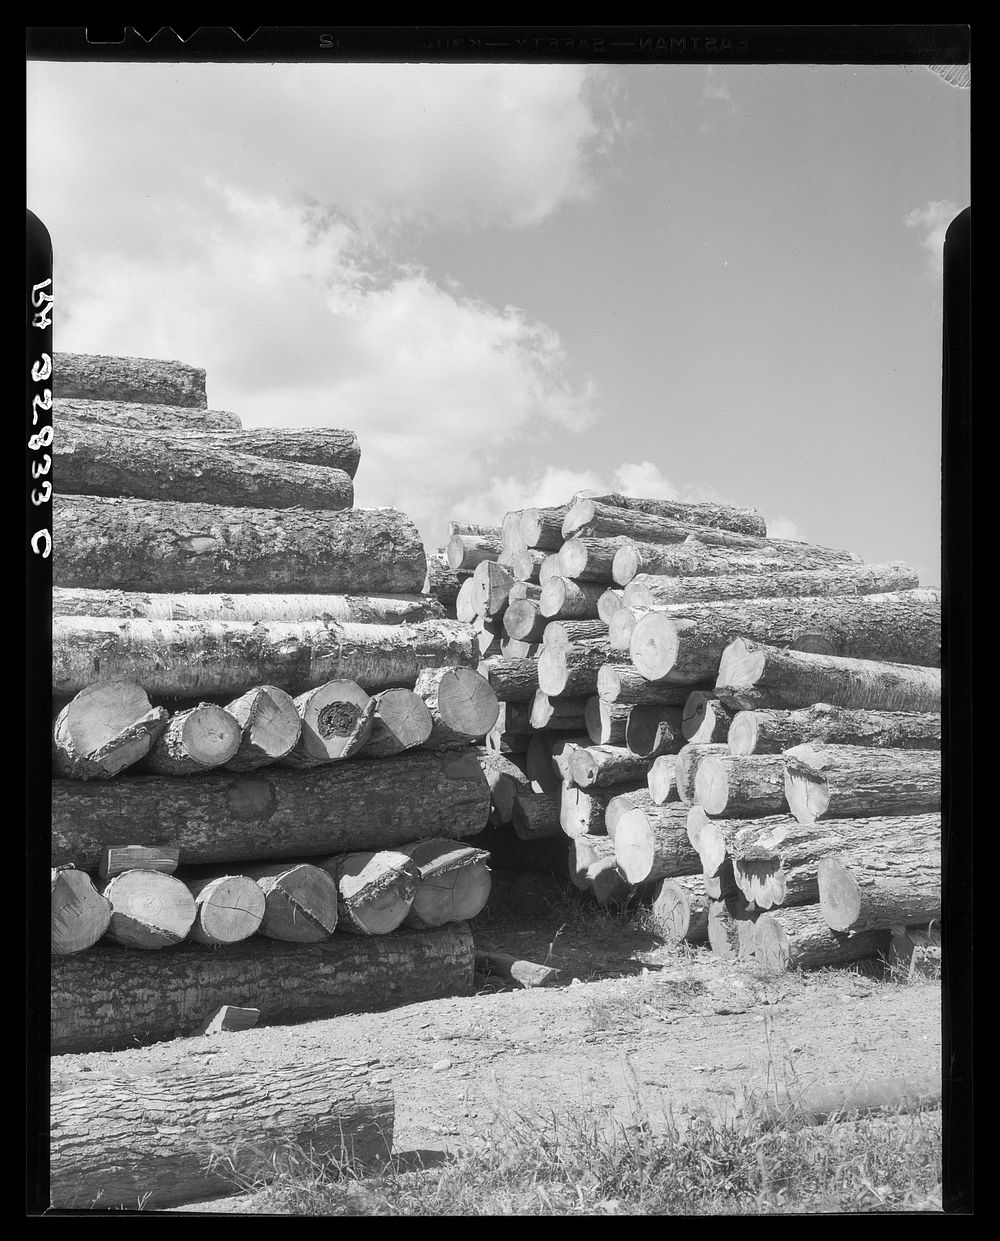 Logs for veneer mill at Morrisville, Vermont. Sourced from the Library of Congress.